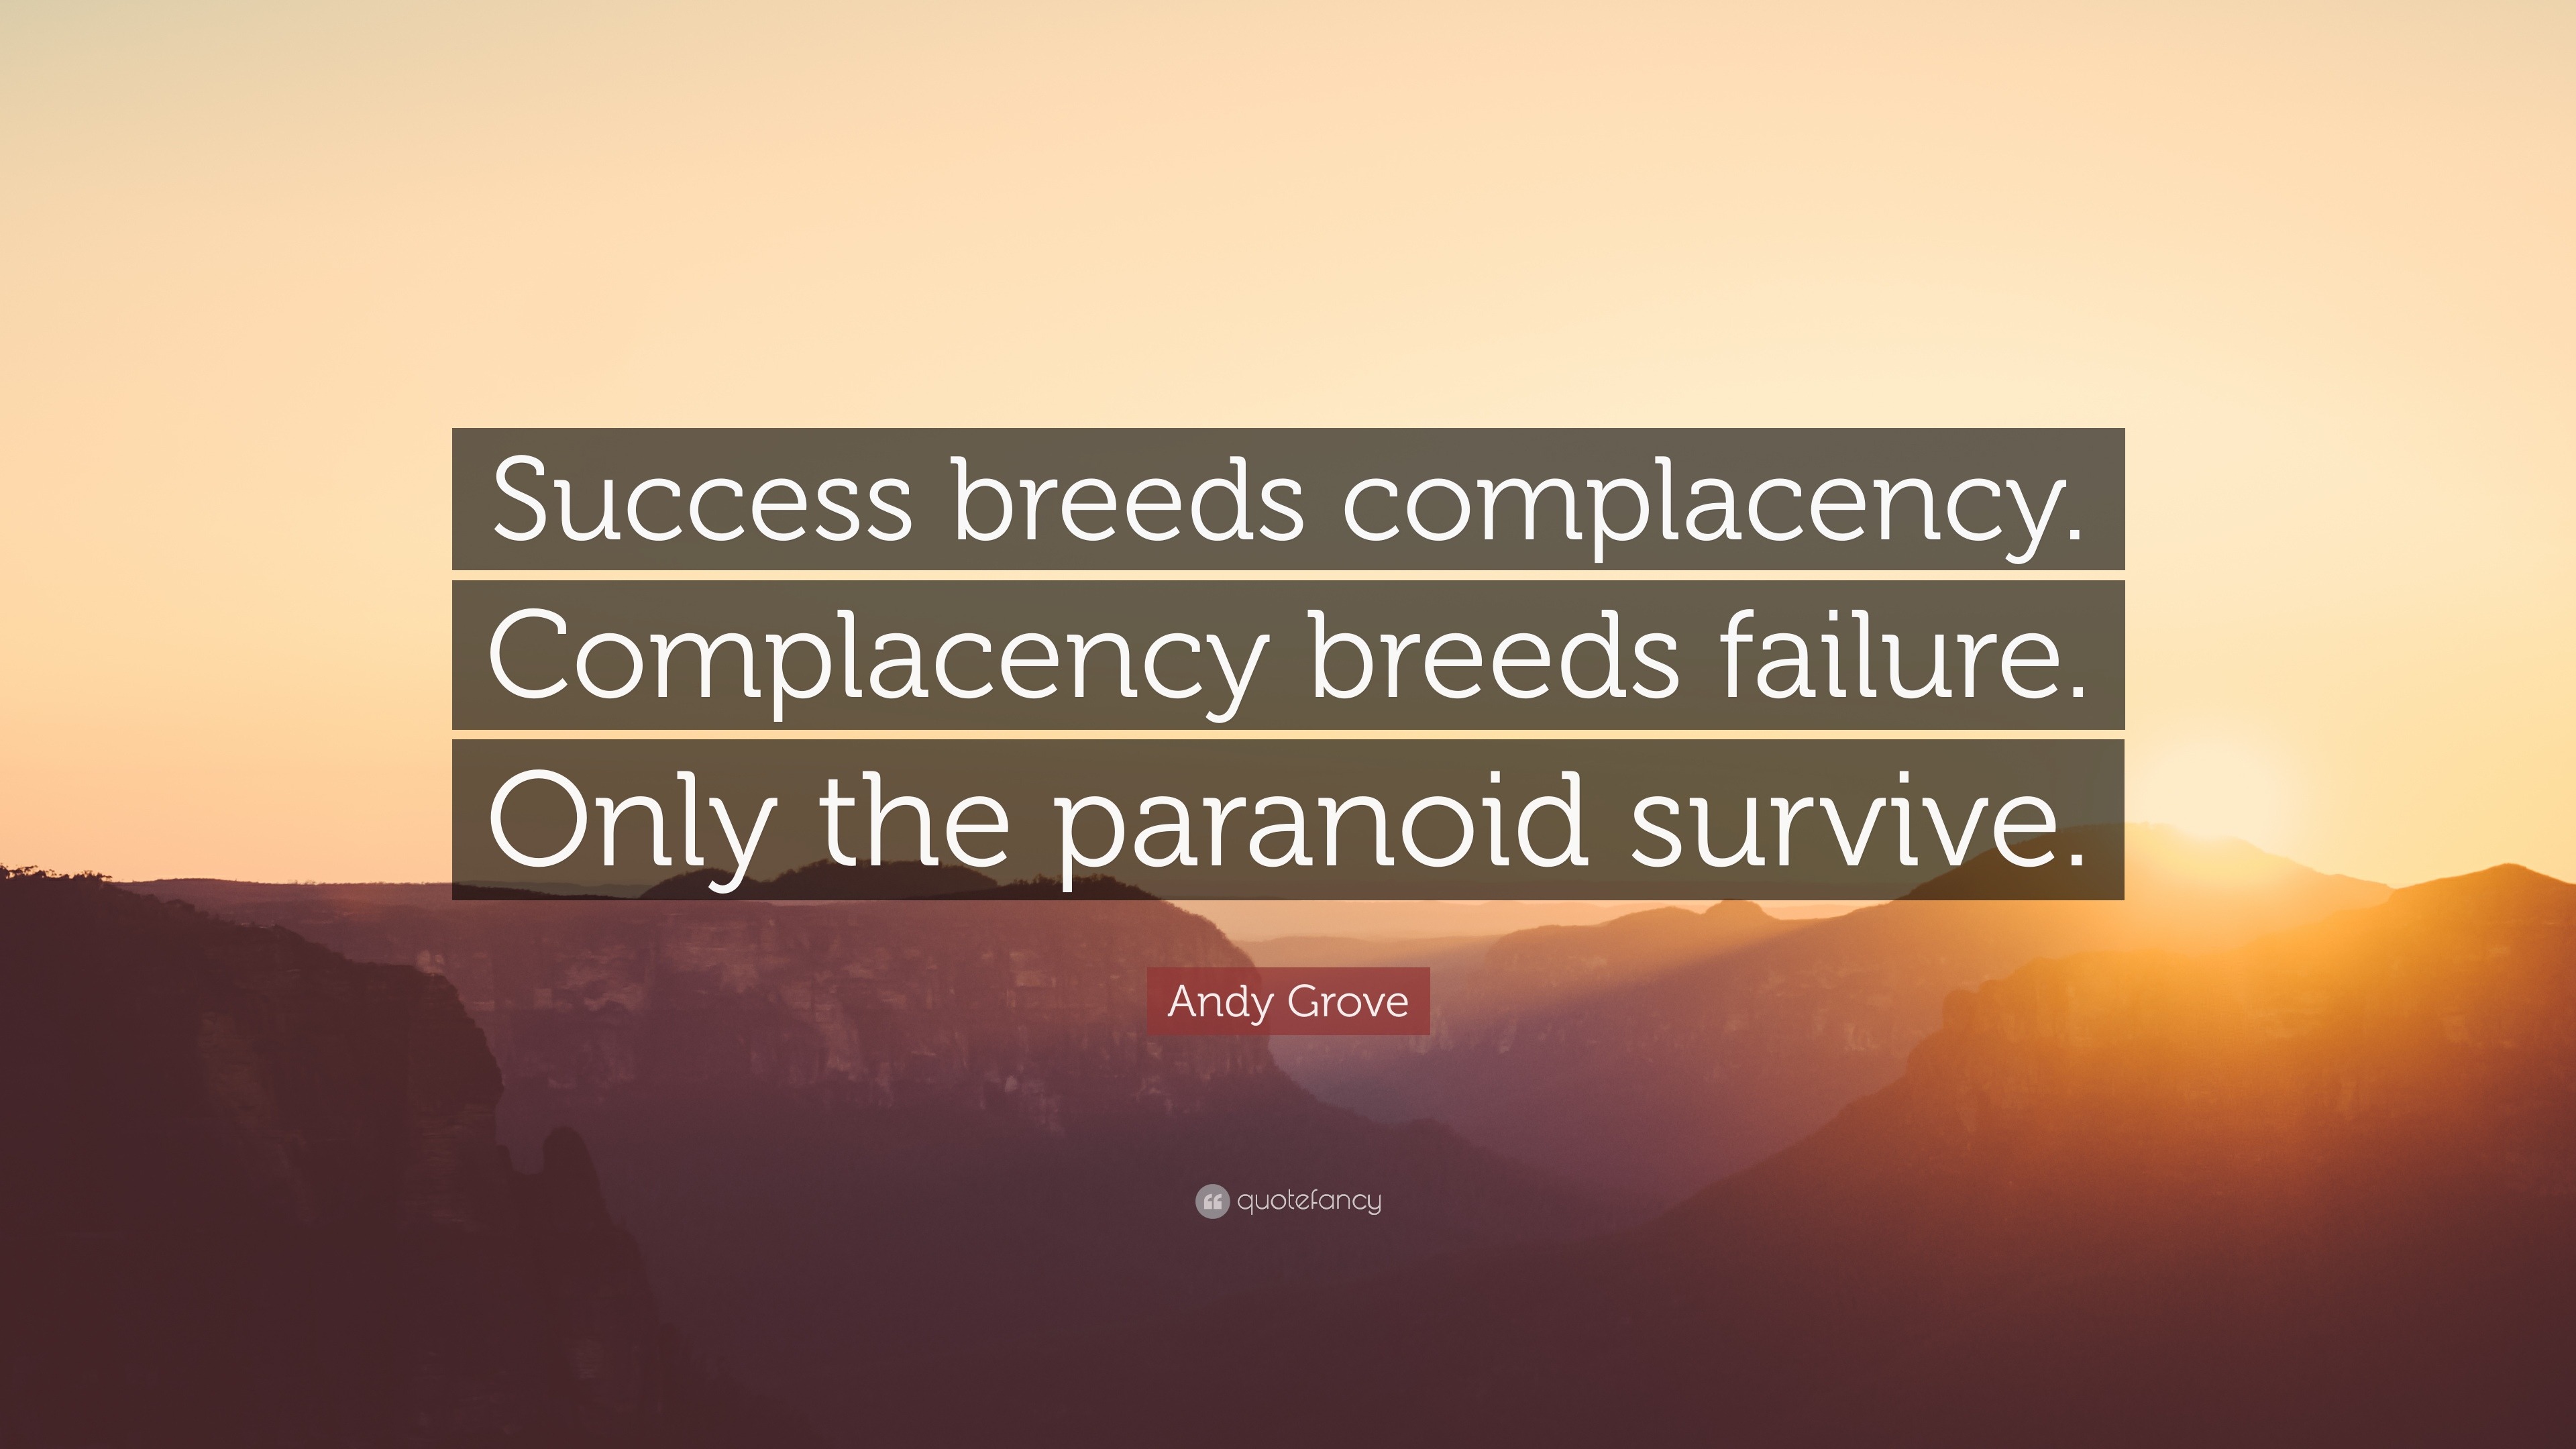 Andy Grove Quote: "Success breeds complacency. Complacency breeds failure. Only the paranoid ...